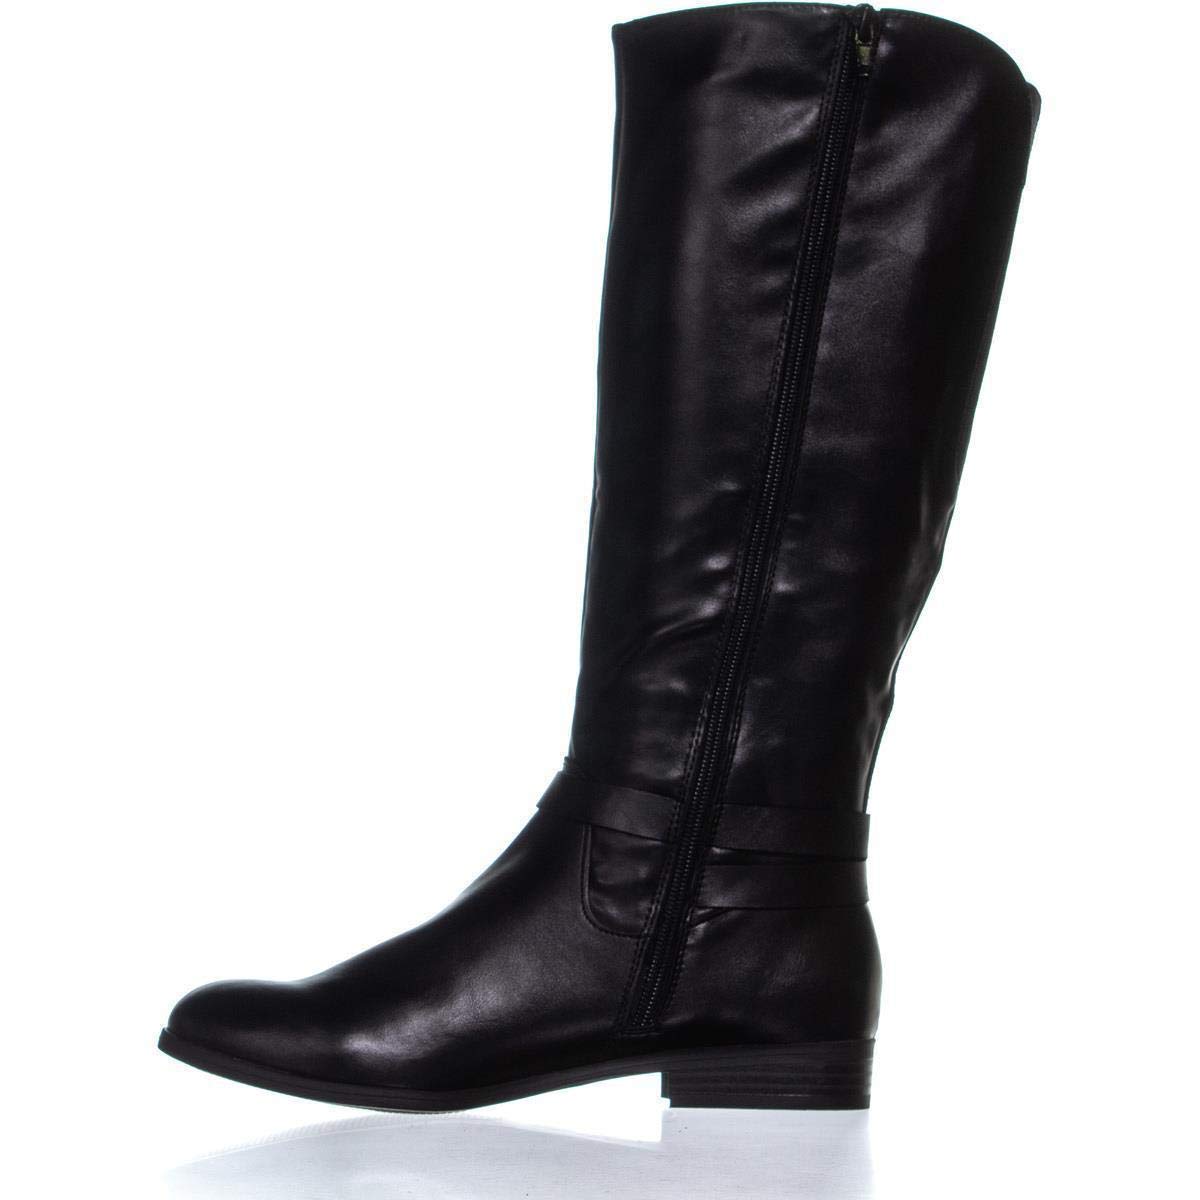 Style & Co. Womens Round Toe Knee High Riding Boots, Black, Size 7.0 ...